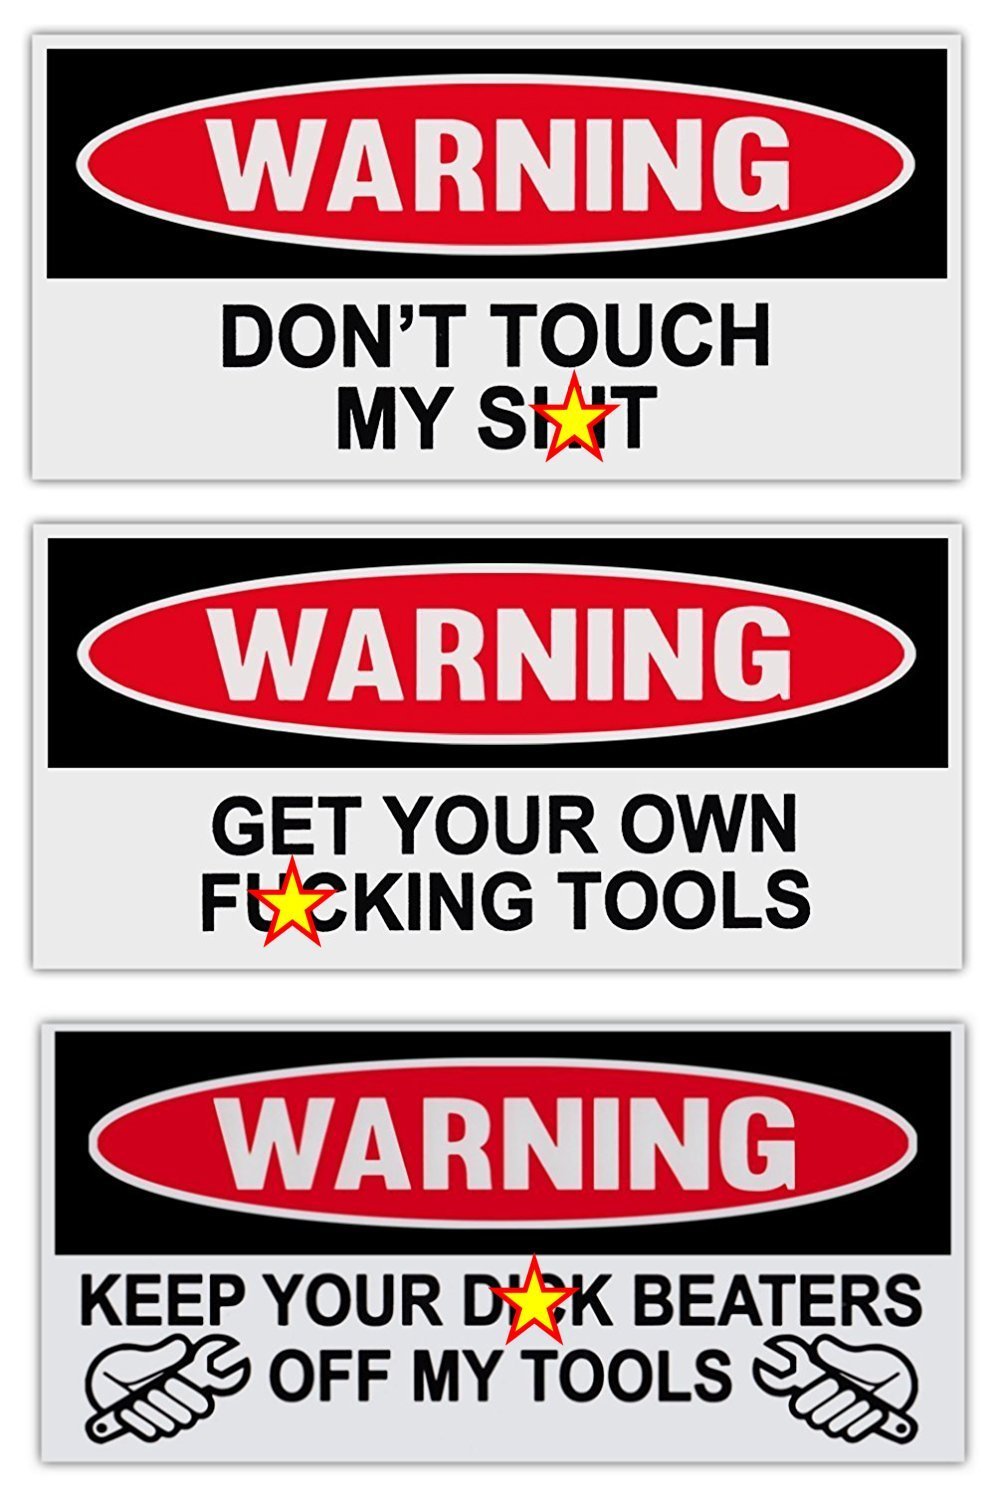  [AUSTRALIA] - Funny Warning Stickers - Toolbox Combo Kit - 3 Stickers - Get Your Own Fcking Tools - Mechanics, Auto Shops, Construction, Oil Field, Roughnecks (ACTUAL STICKERS WILL NOT BE CENSORED)